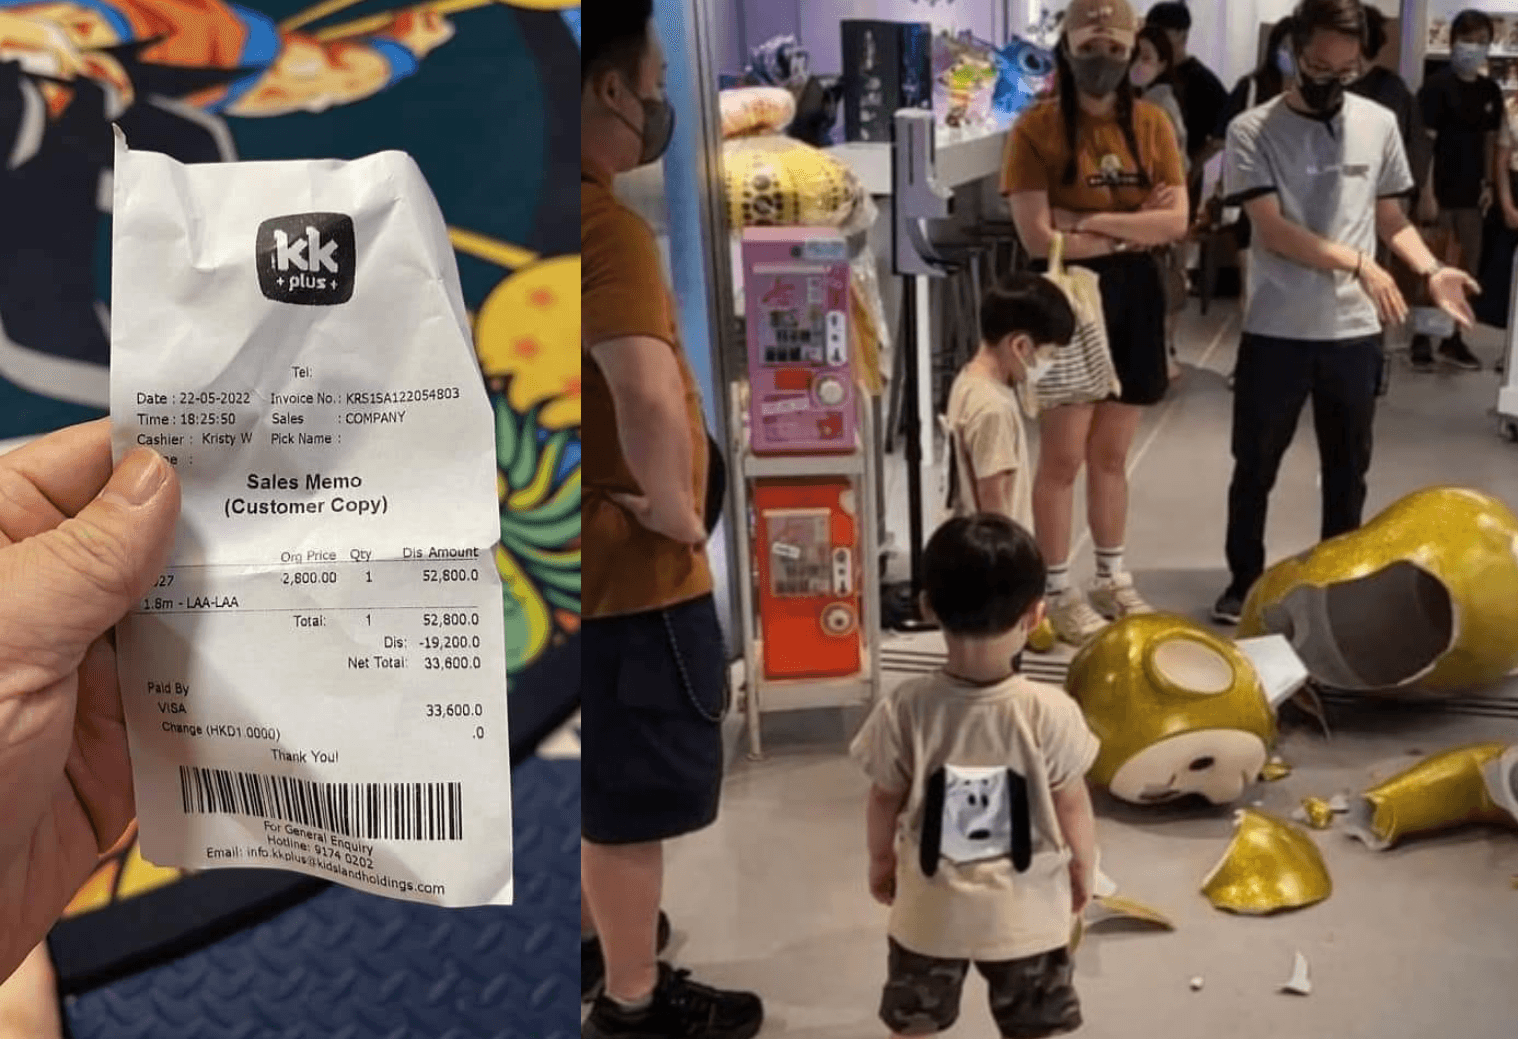 Toy Store Receives Massive Backlash After Kid Accidentally Breaks RM29,500 Statue